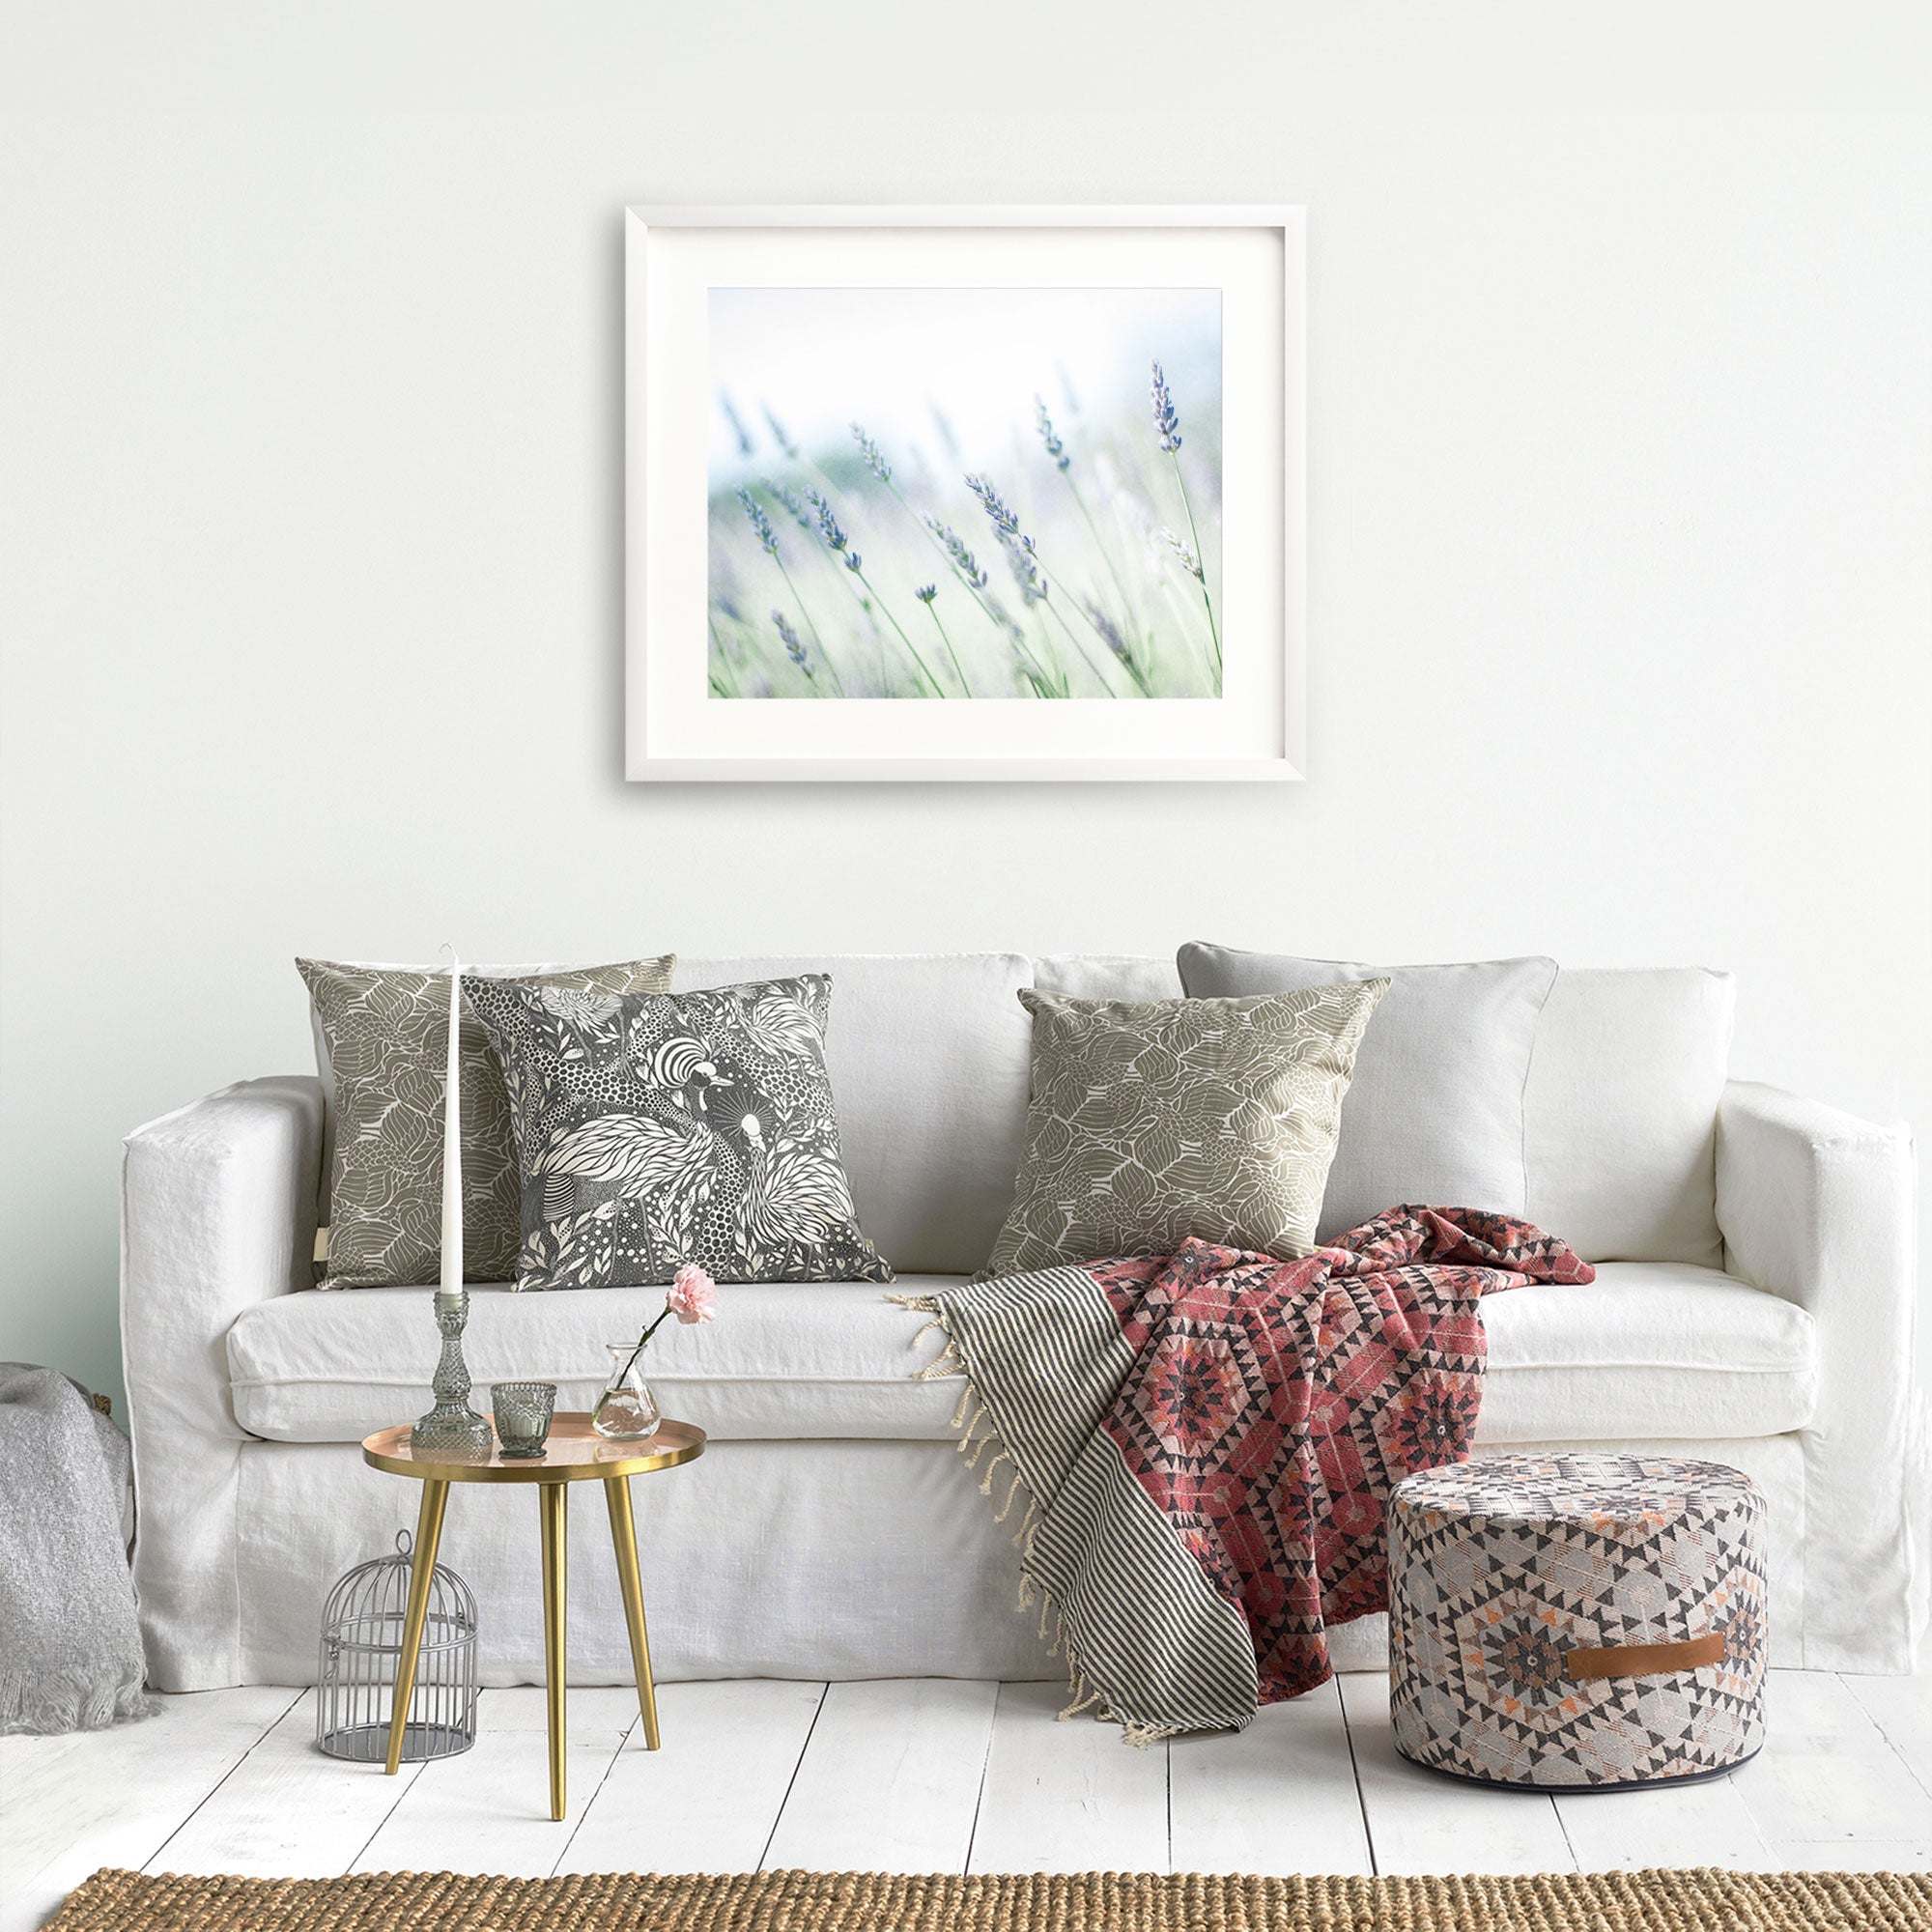 A cozy living room scene with a white sofa adorned with patterned cushions, a red and gray throw blanket, and a small gold side table. A framed picture of the Santa Ynez Valley hangs above the Offley Green Rustic Farmhouse Floral Wall Art, &#39;Buds of Lavender&#39;.